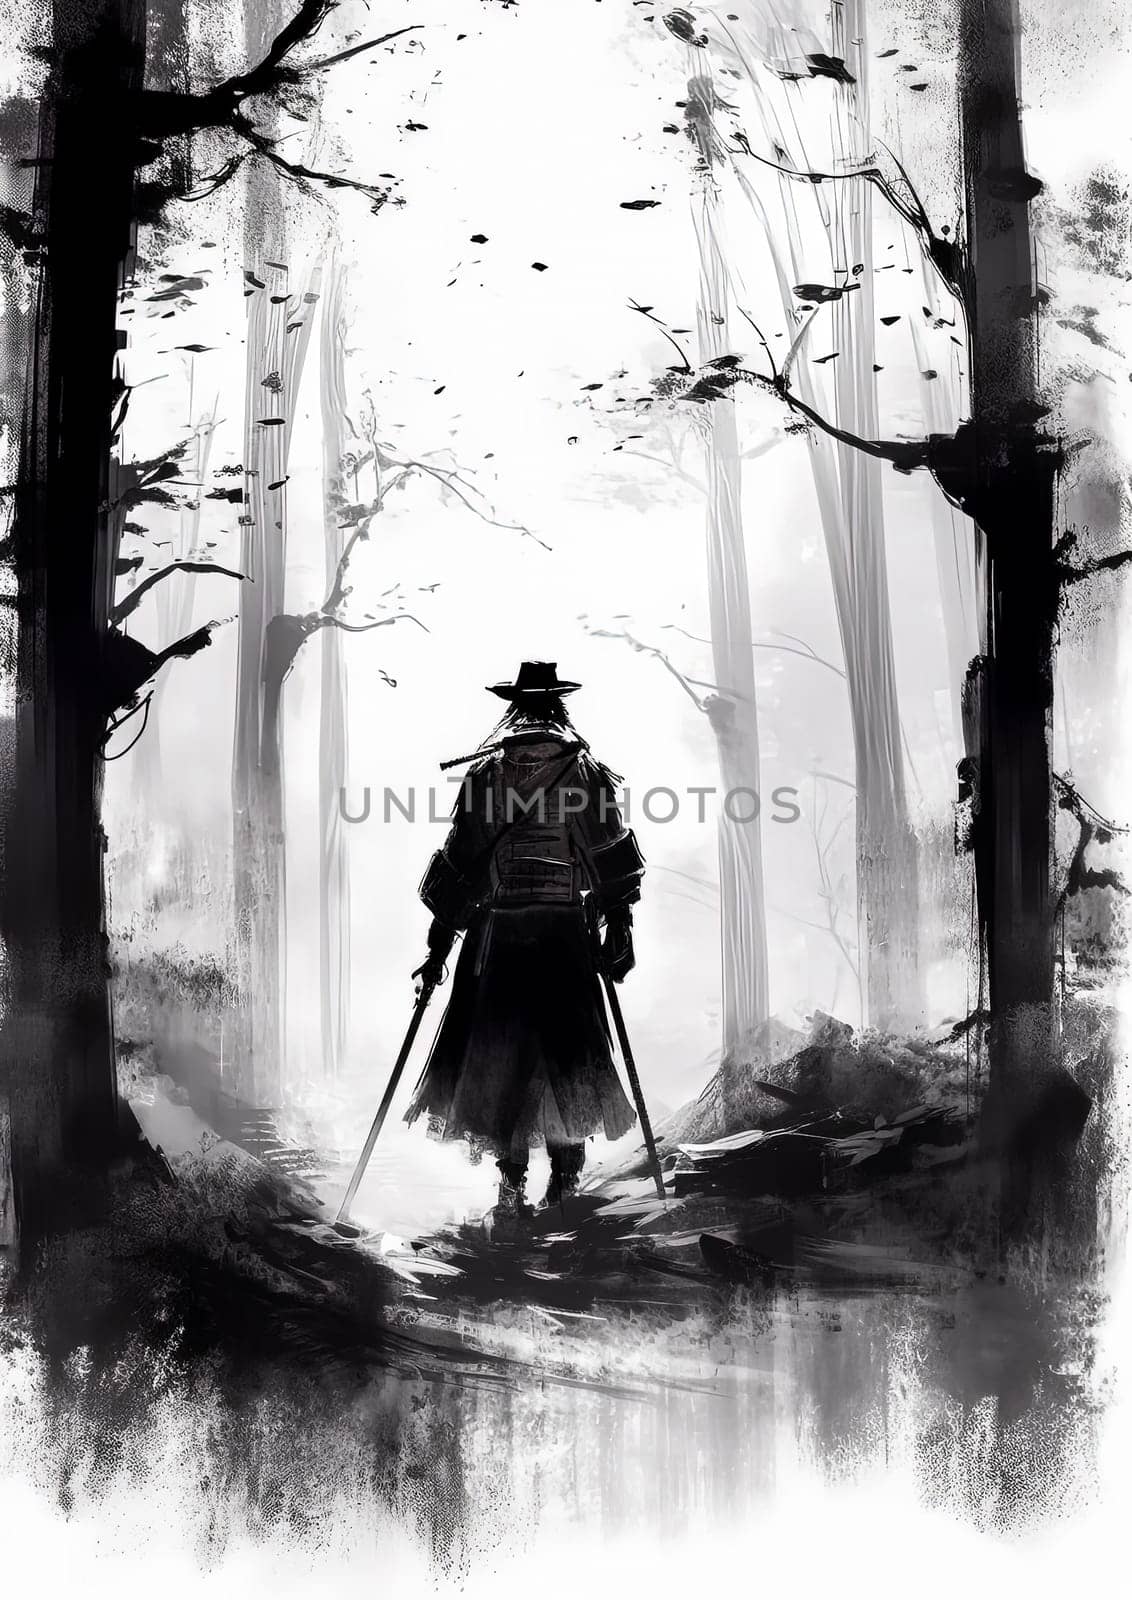 A man is walking through a forest with a hat on. The image is black and white and has a moody, mysterious feel to it